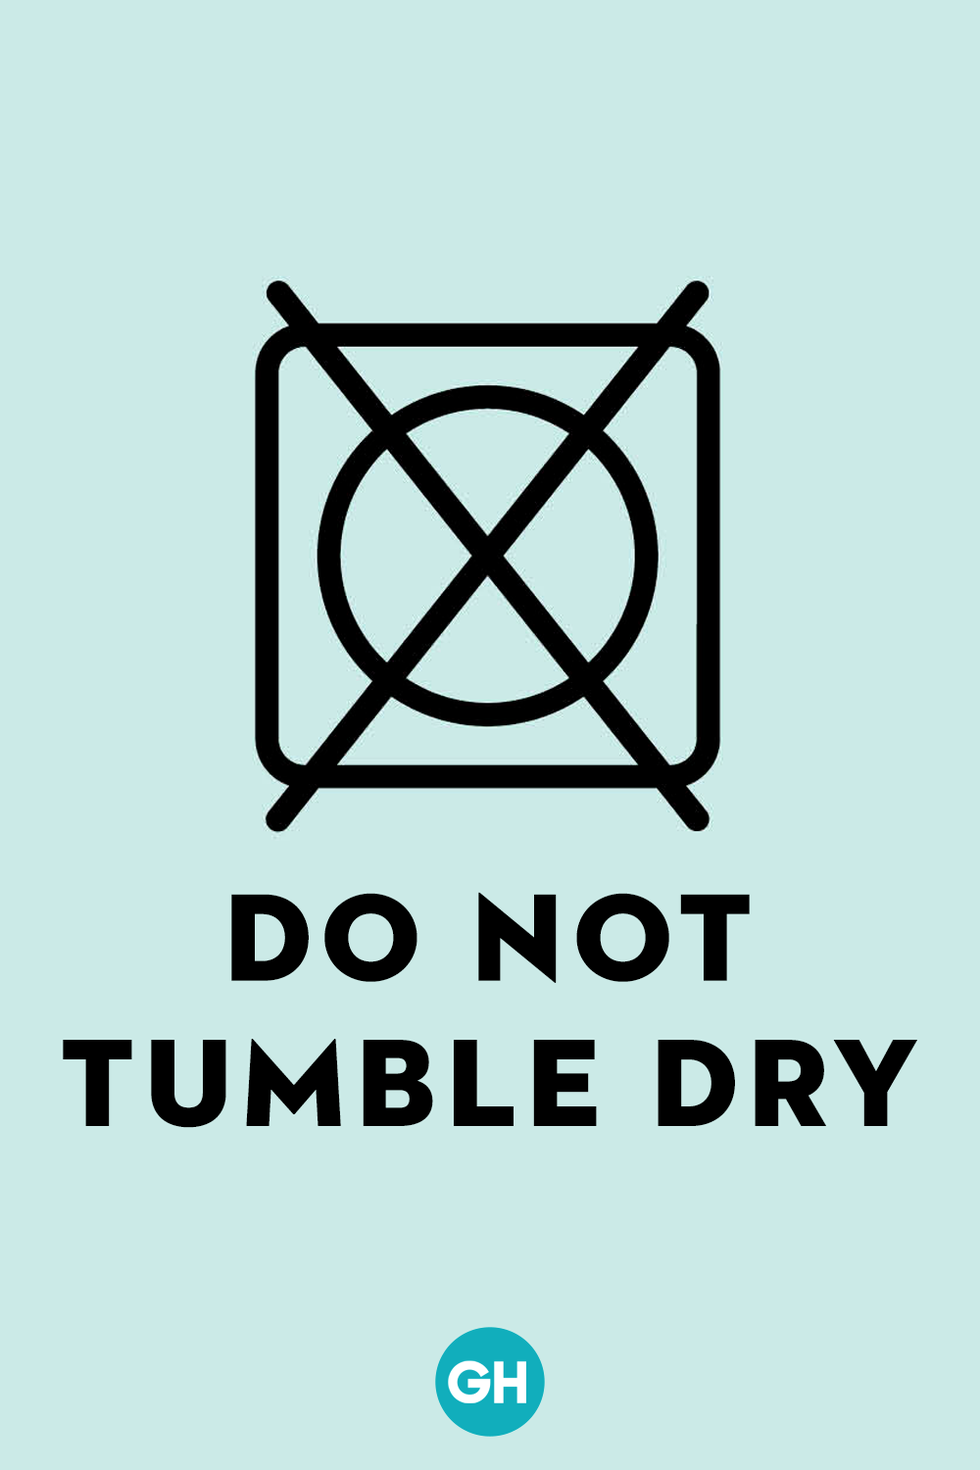 Do Not Tumble Dry Meaning